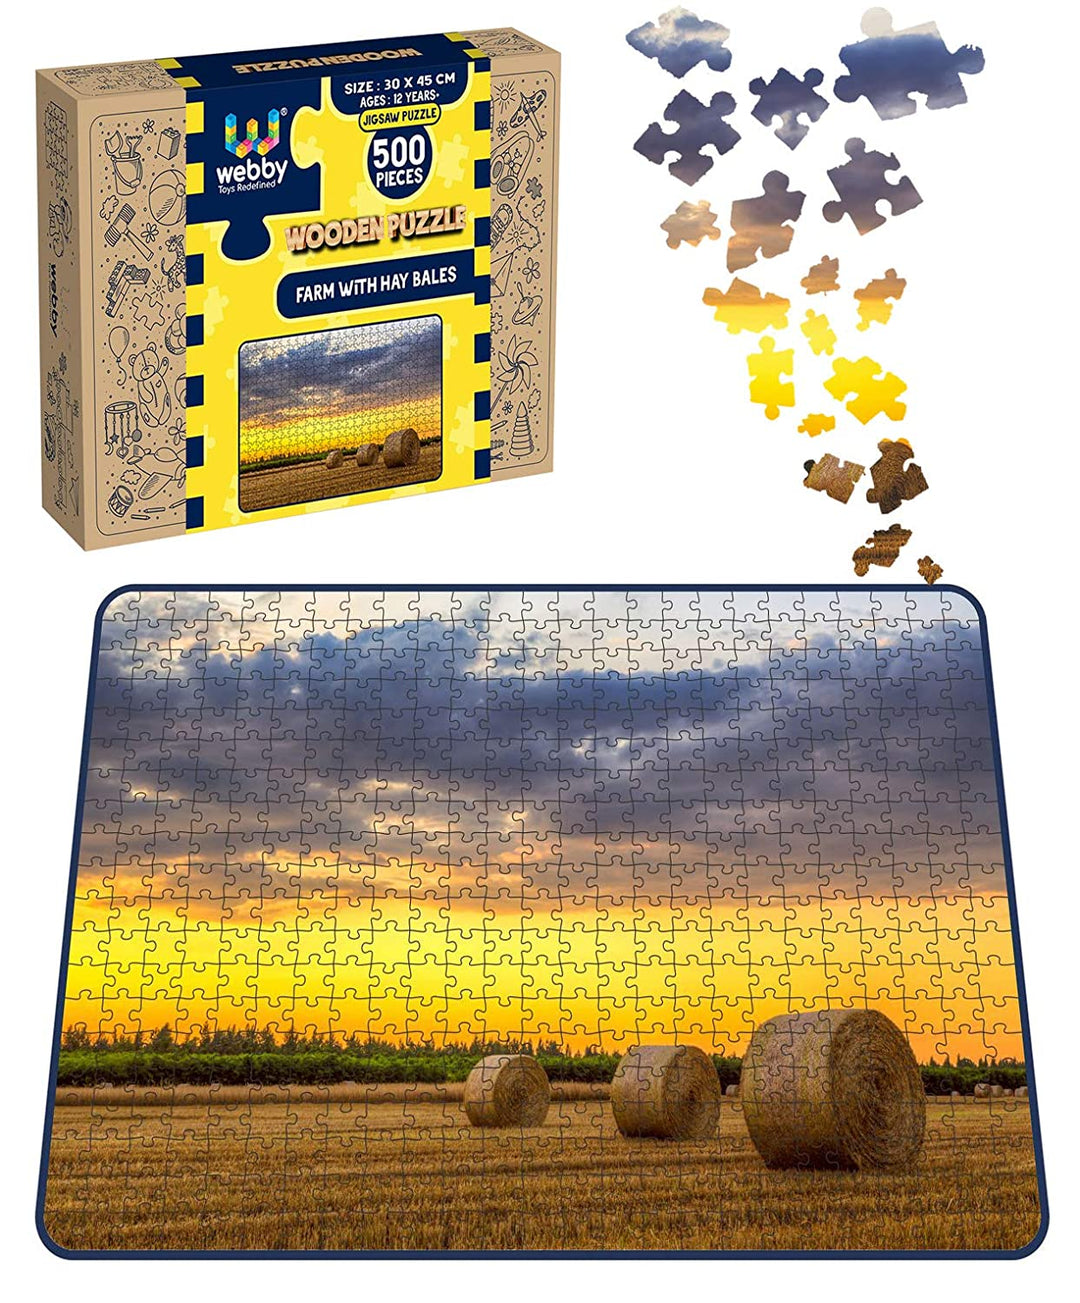 Webby Farm with Hay Bales Wooden Jigsaw Puzzle, 500 pieces